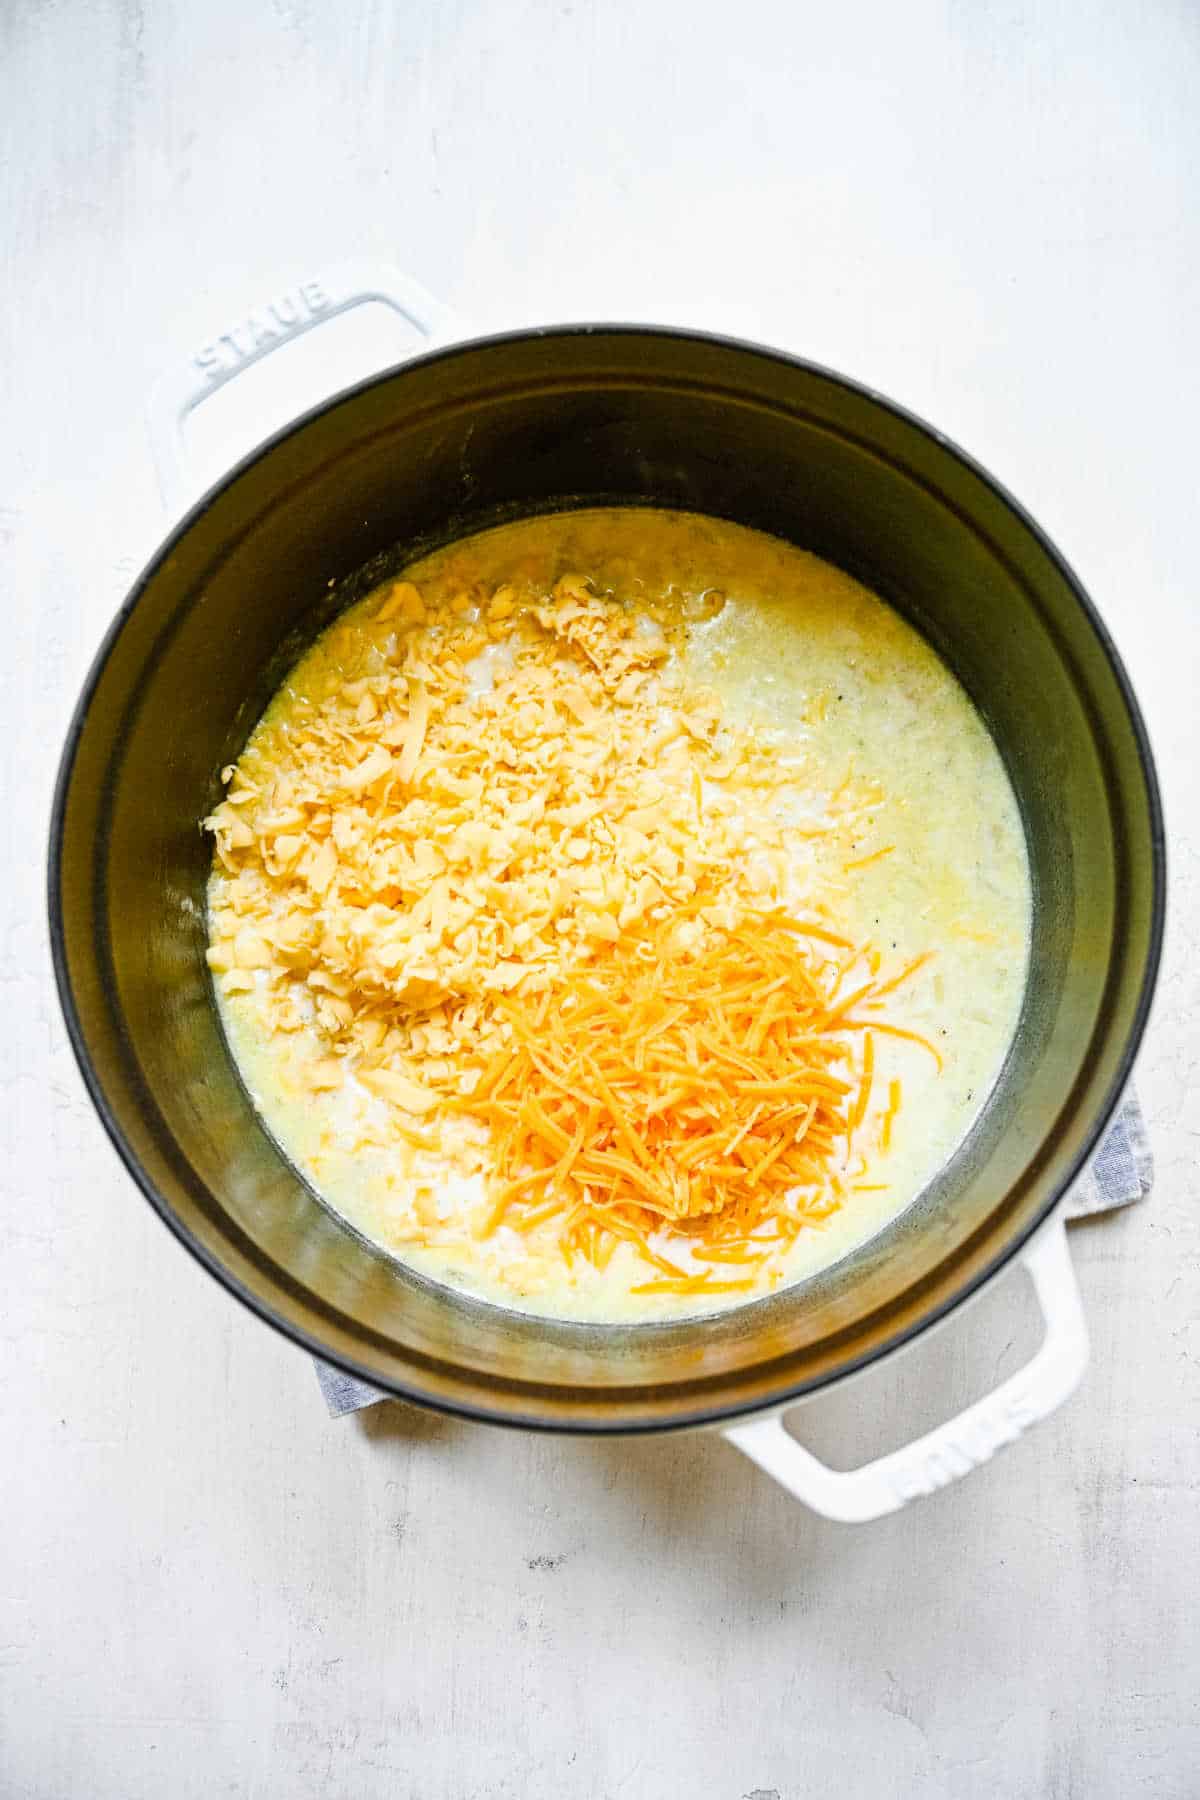 Shredded gouda and cheddar cheeses in milk mixture. 